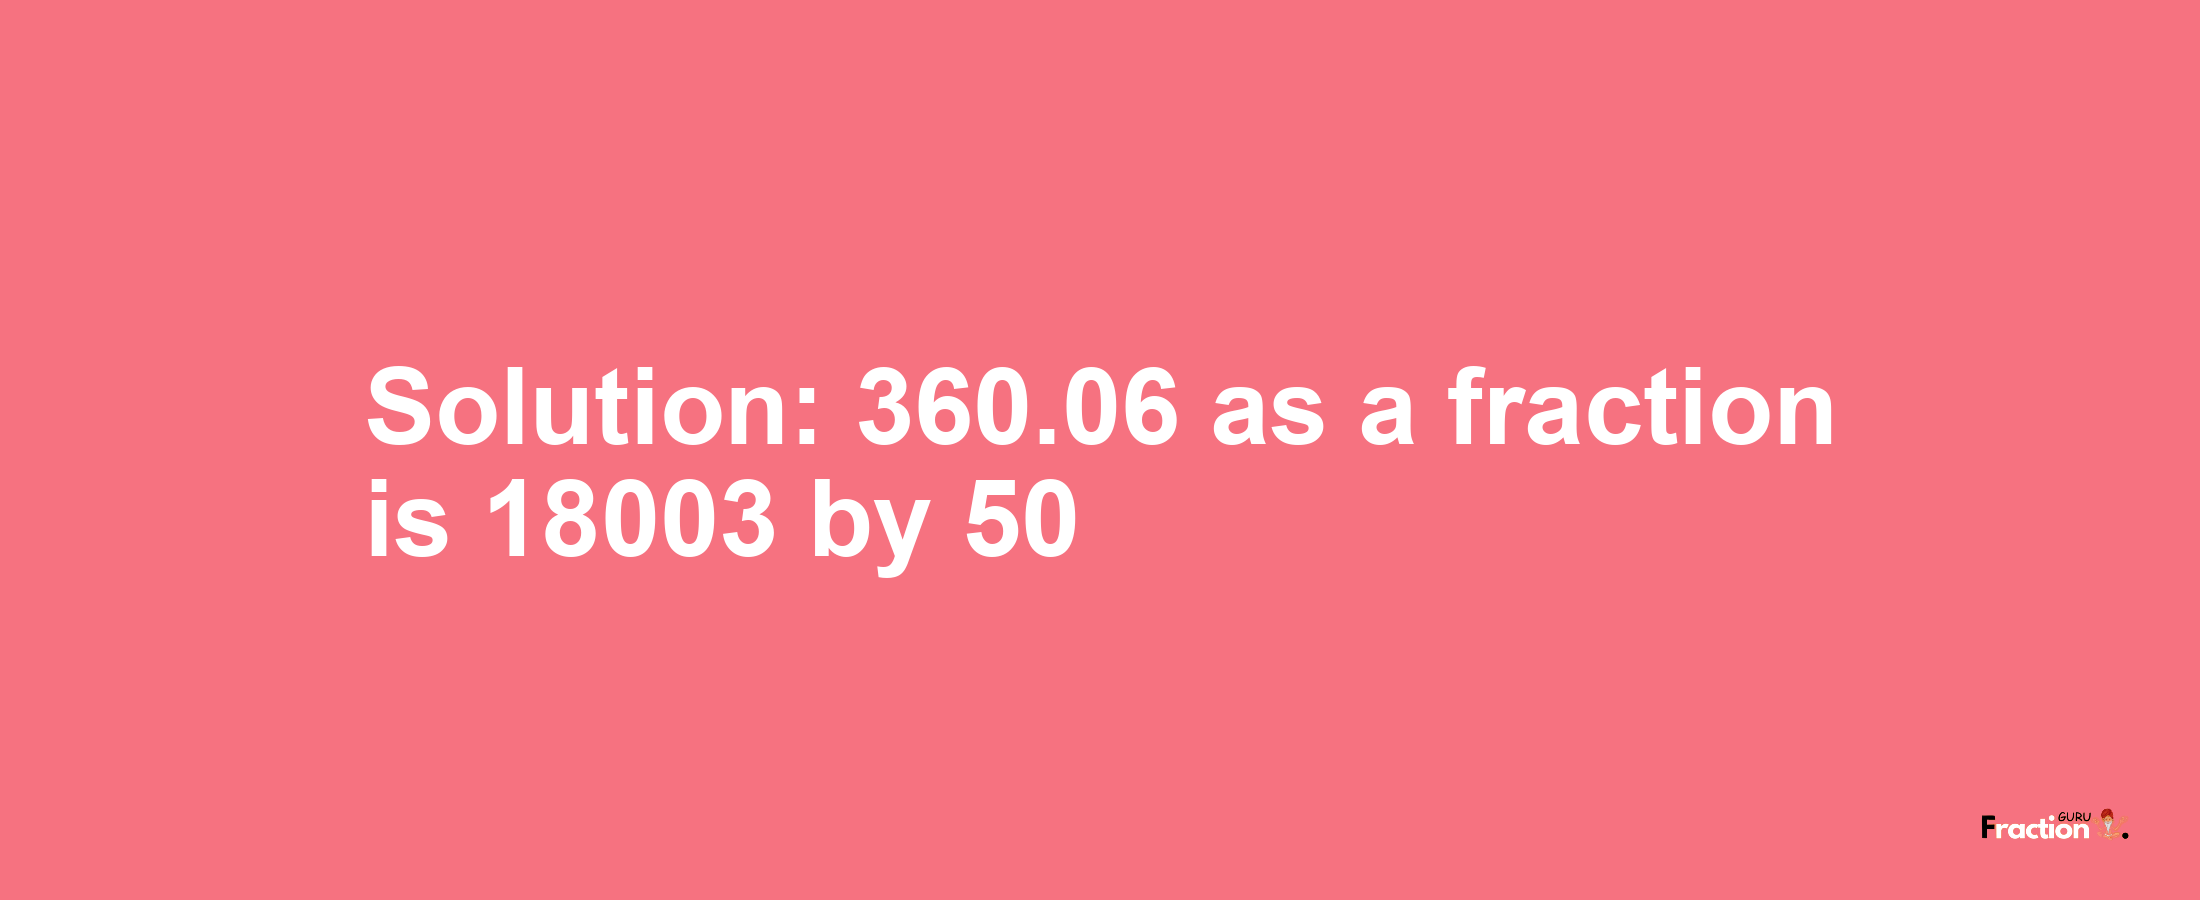 Solution:360.06 as a fraction is 18003/50